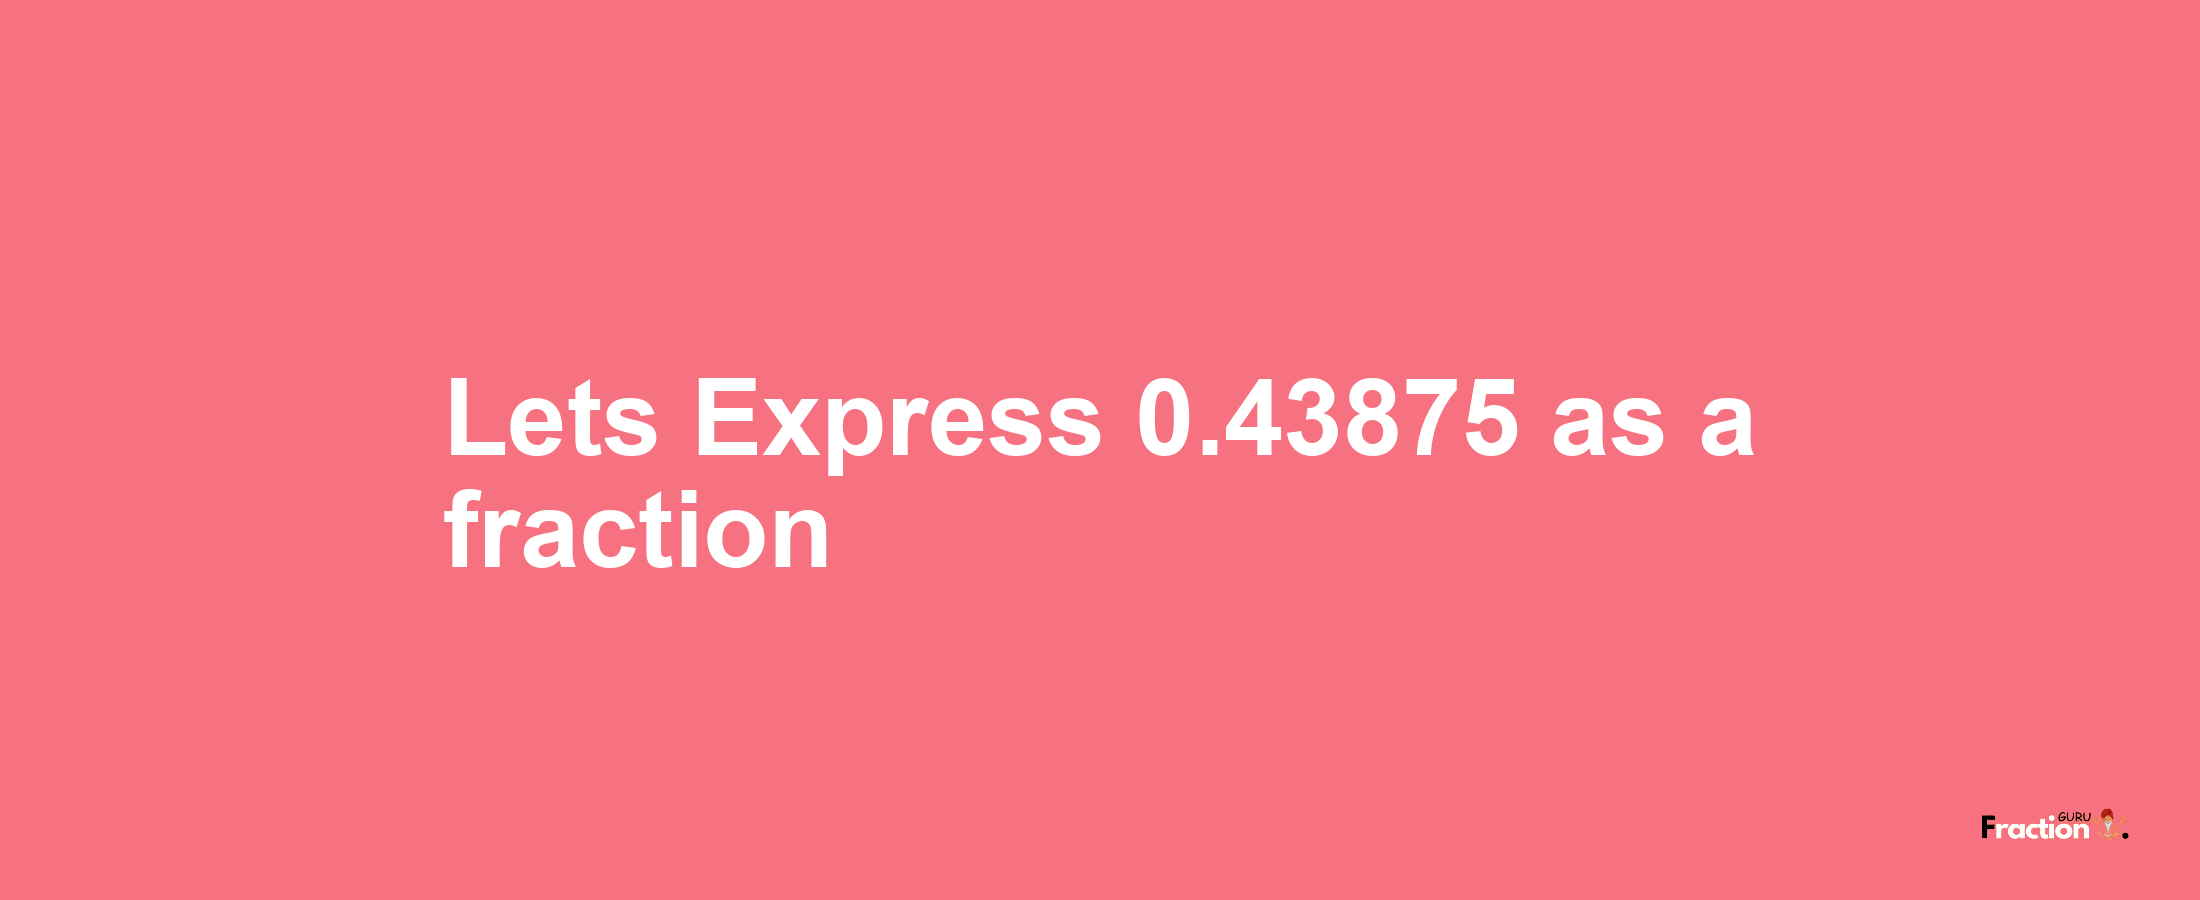 Lets Express 0.43875 as afraction